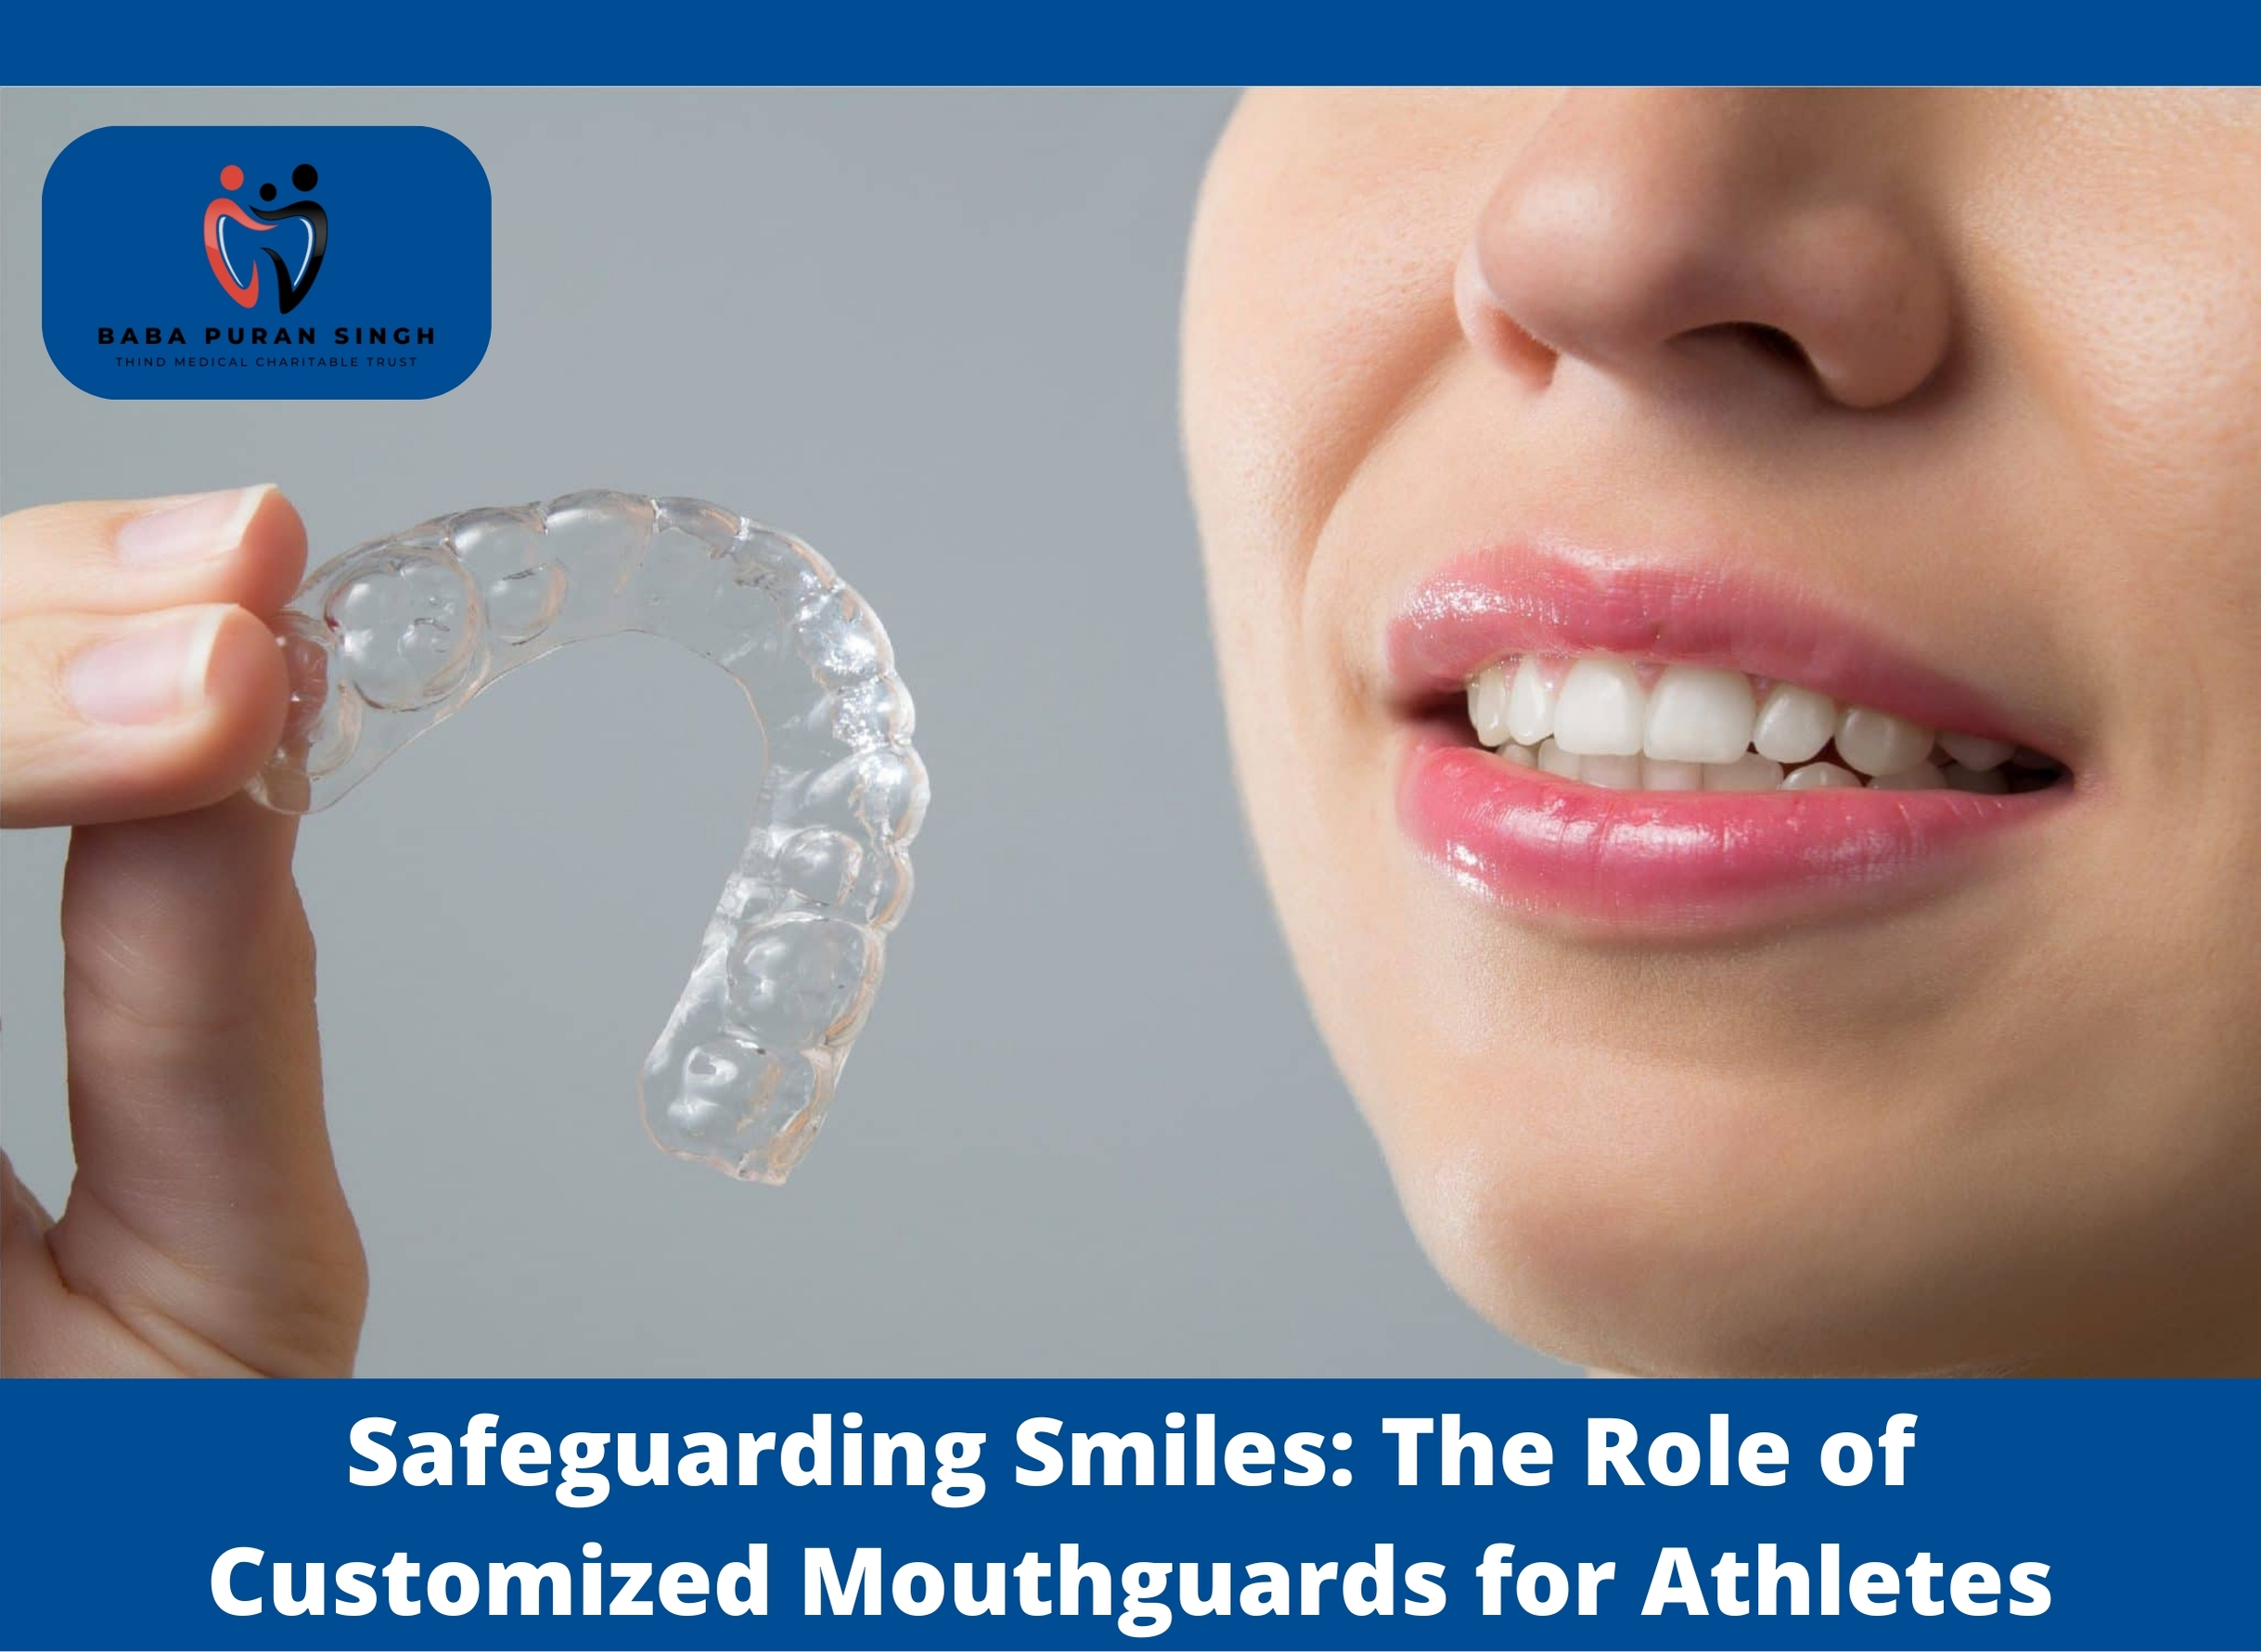 Safeguarding Smiles: The Role of Customized Mouthguards for Athletes